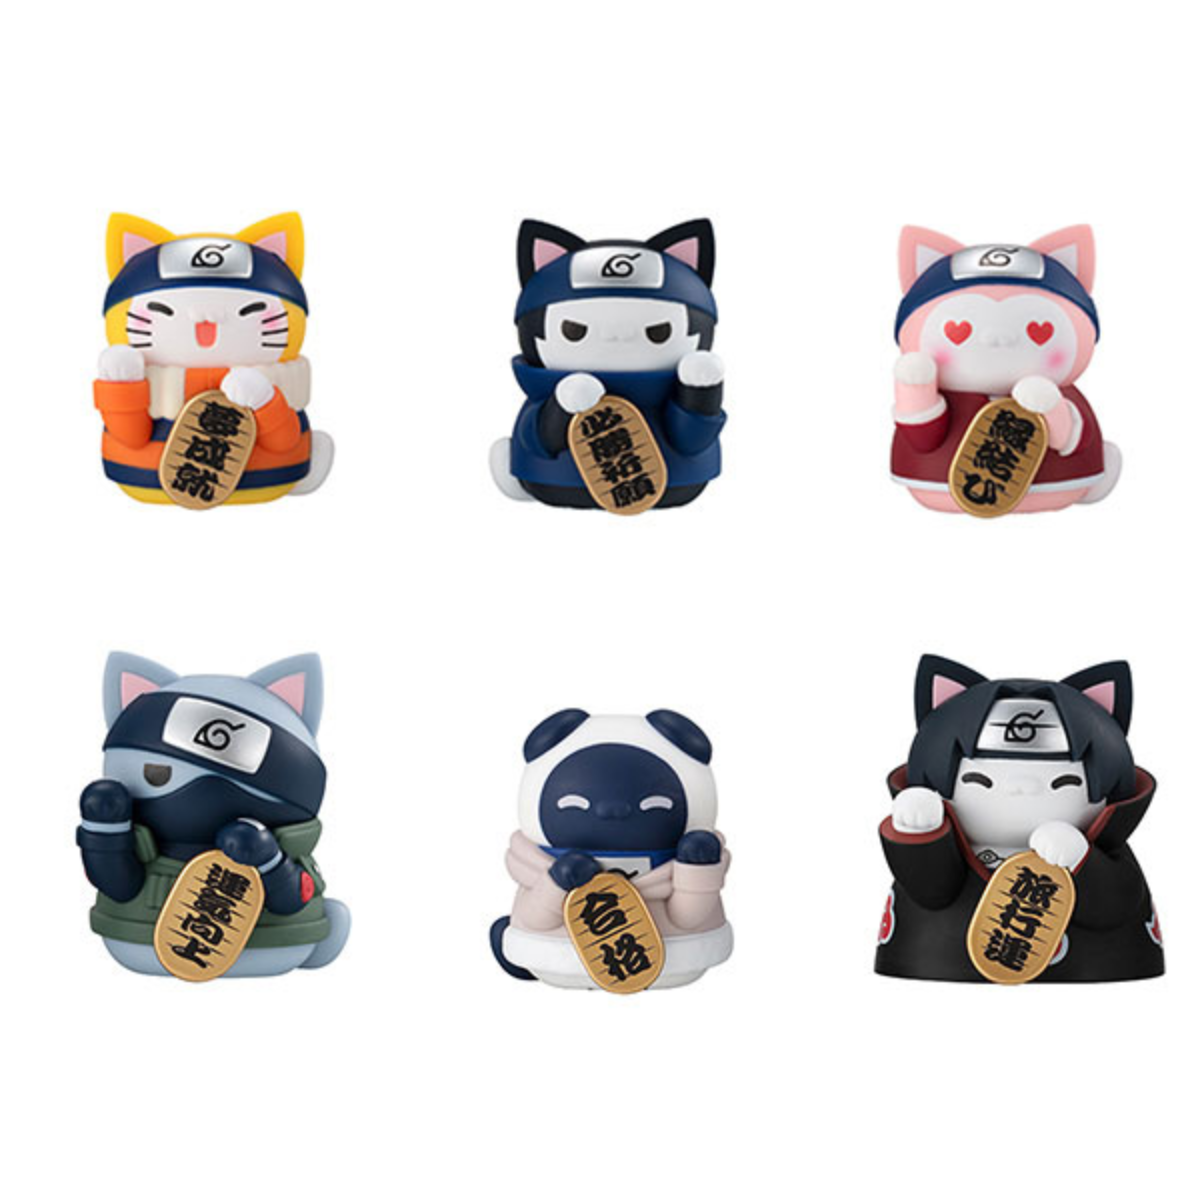 MEGA CAT PROJECT NARUTO Shippuden Nyaruto! Beckoning cat FORTUNE One more time!-Display Box (6pcs)-MegaHouse-Ace Cards &amp; Collectibles